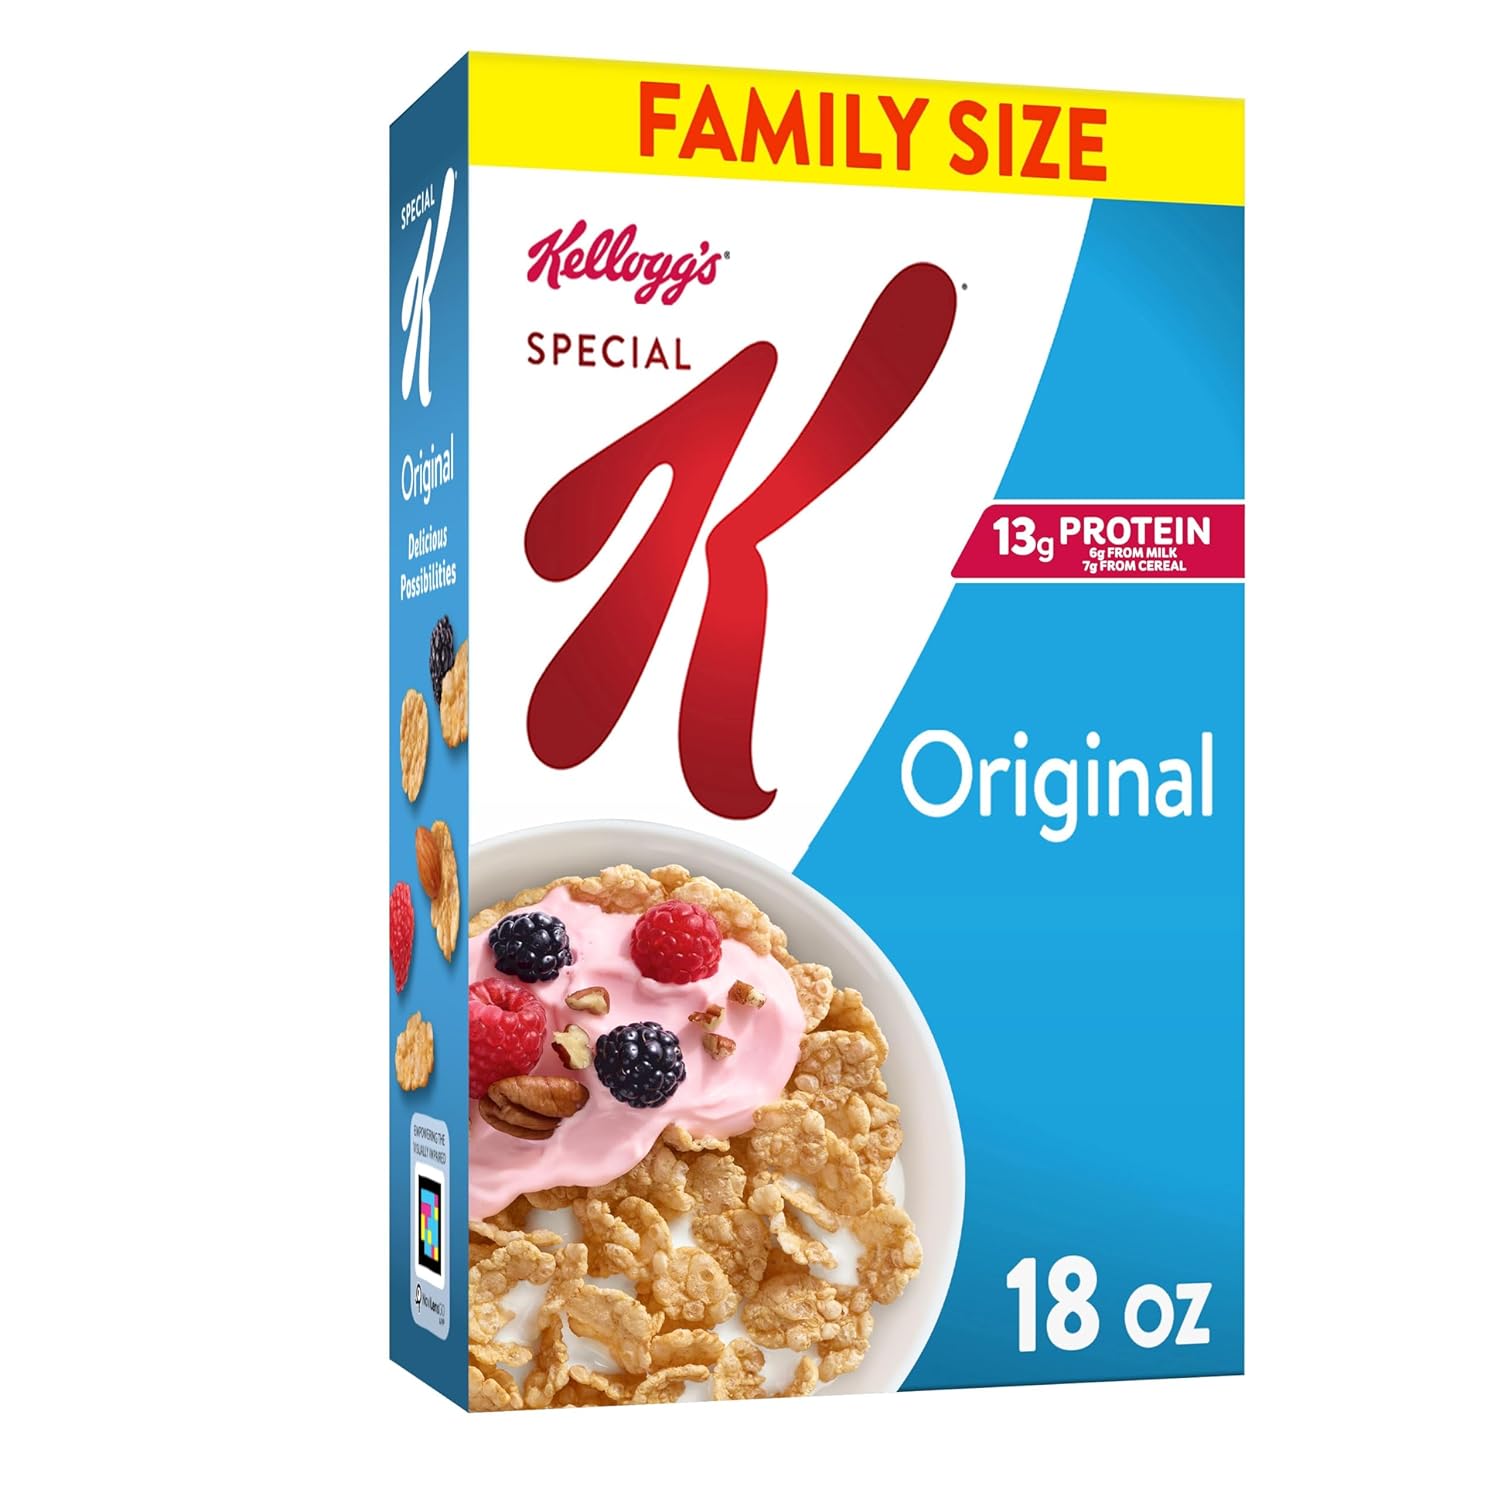 Special K Cold Breakfast Cereal, 11 Vitamins and Minerals, 13g Protein, Family Size, Original, 18Oz Box (1 Box)